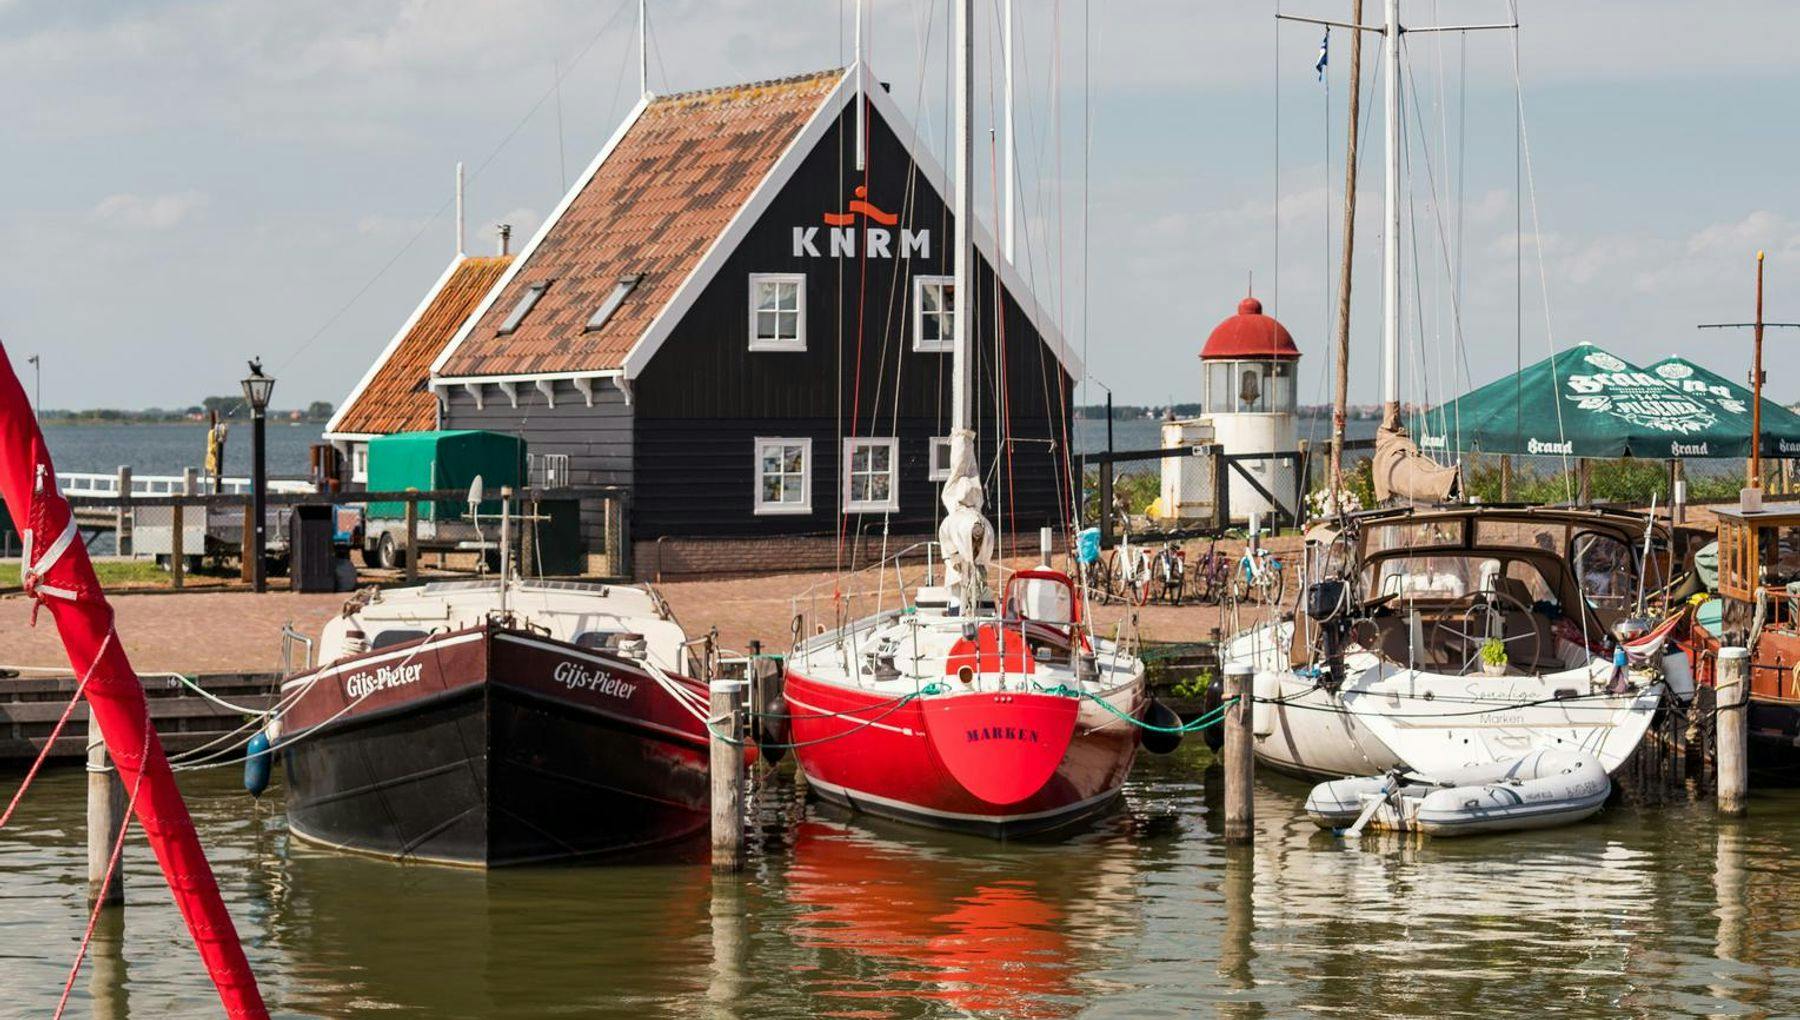 The harbor of the village of Marken.